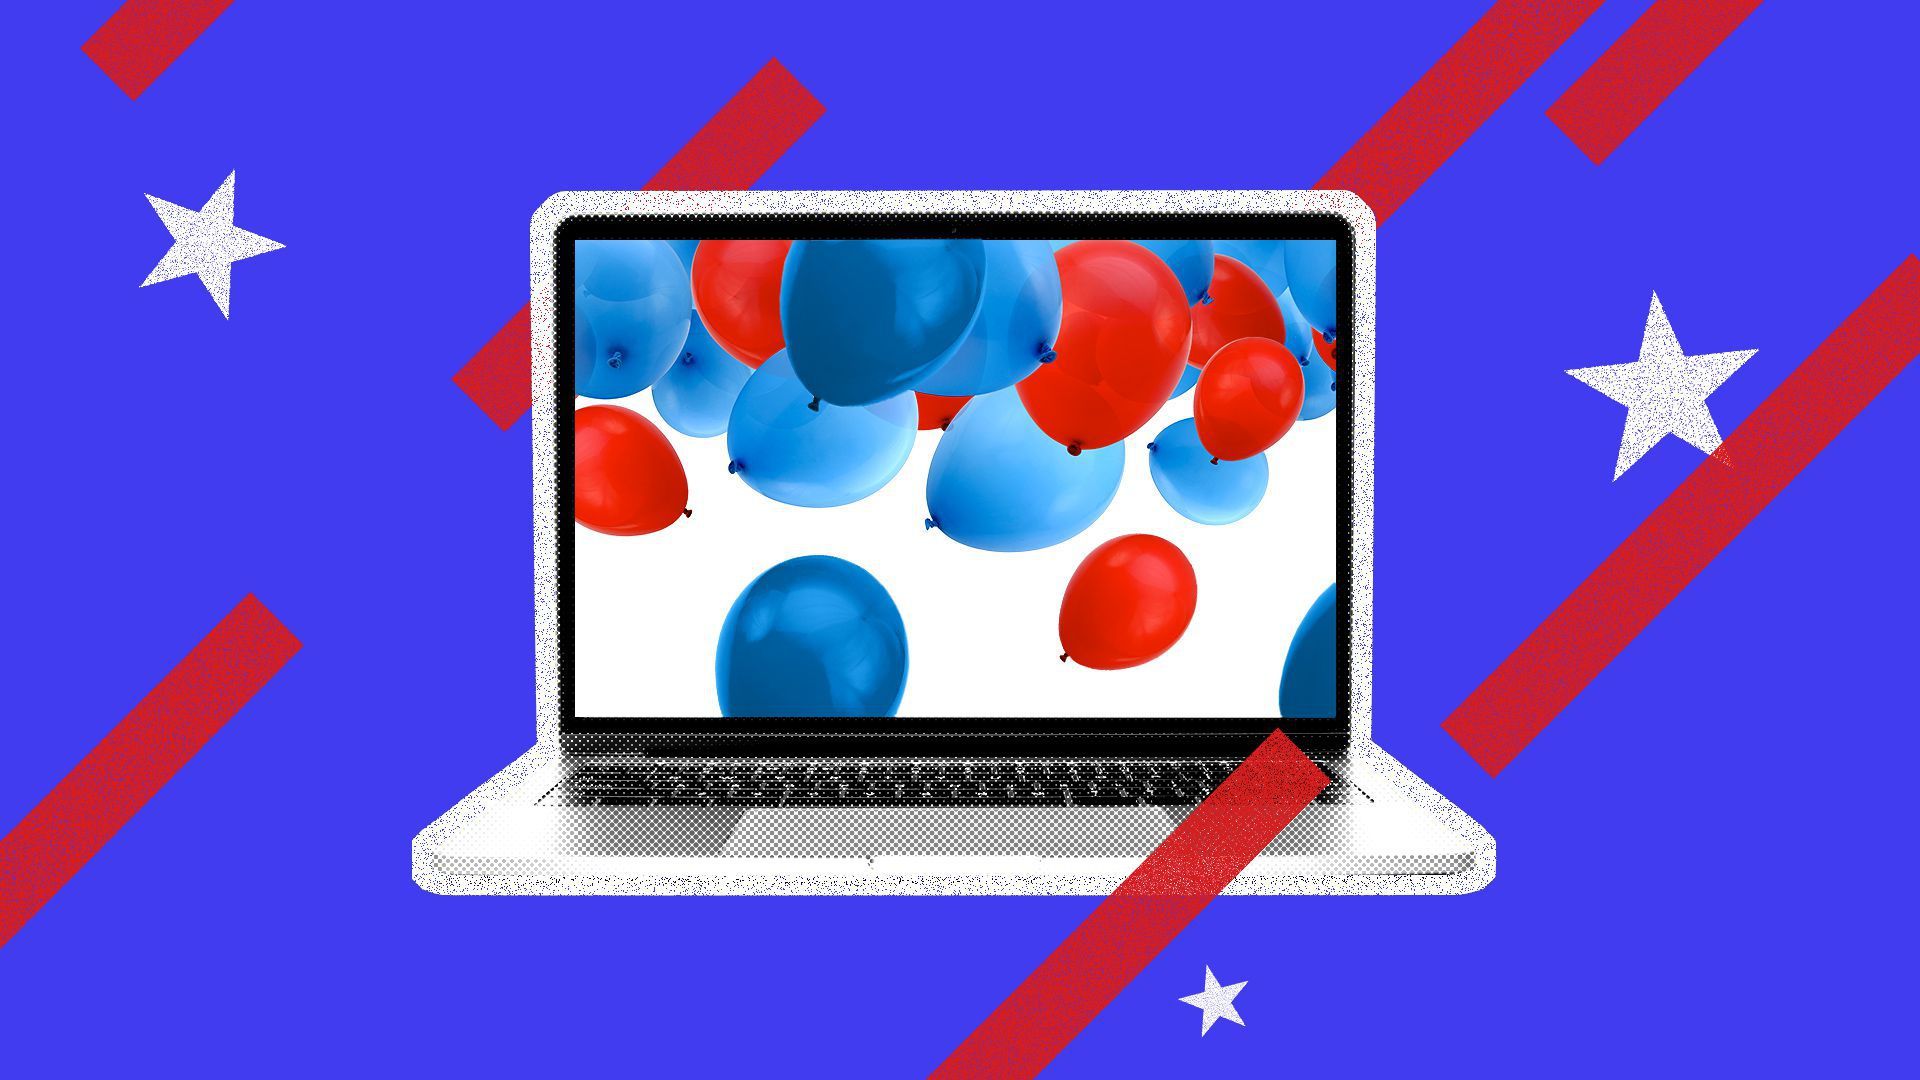 Illustration of a laptop with red and blue balloons on its screen.